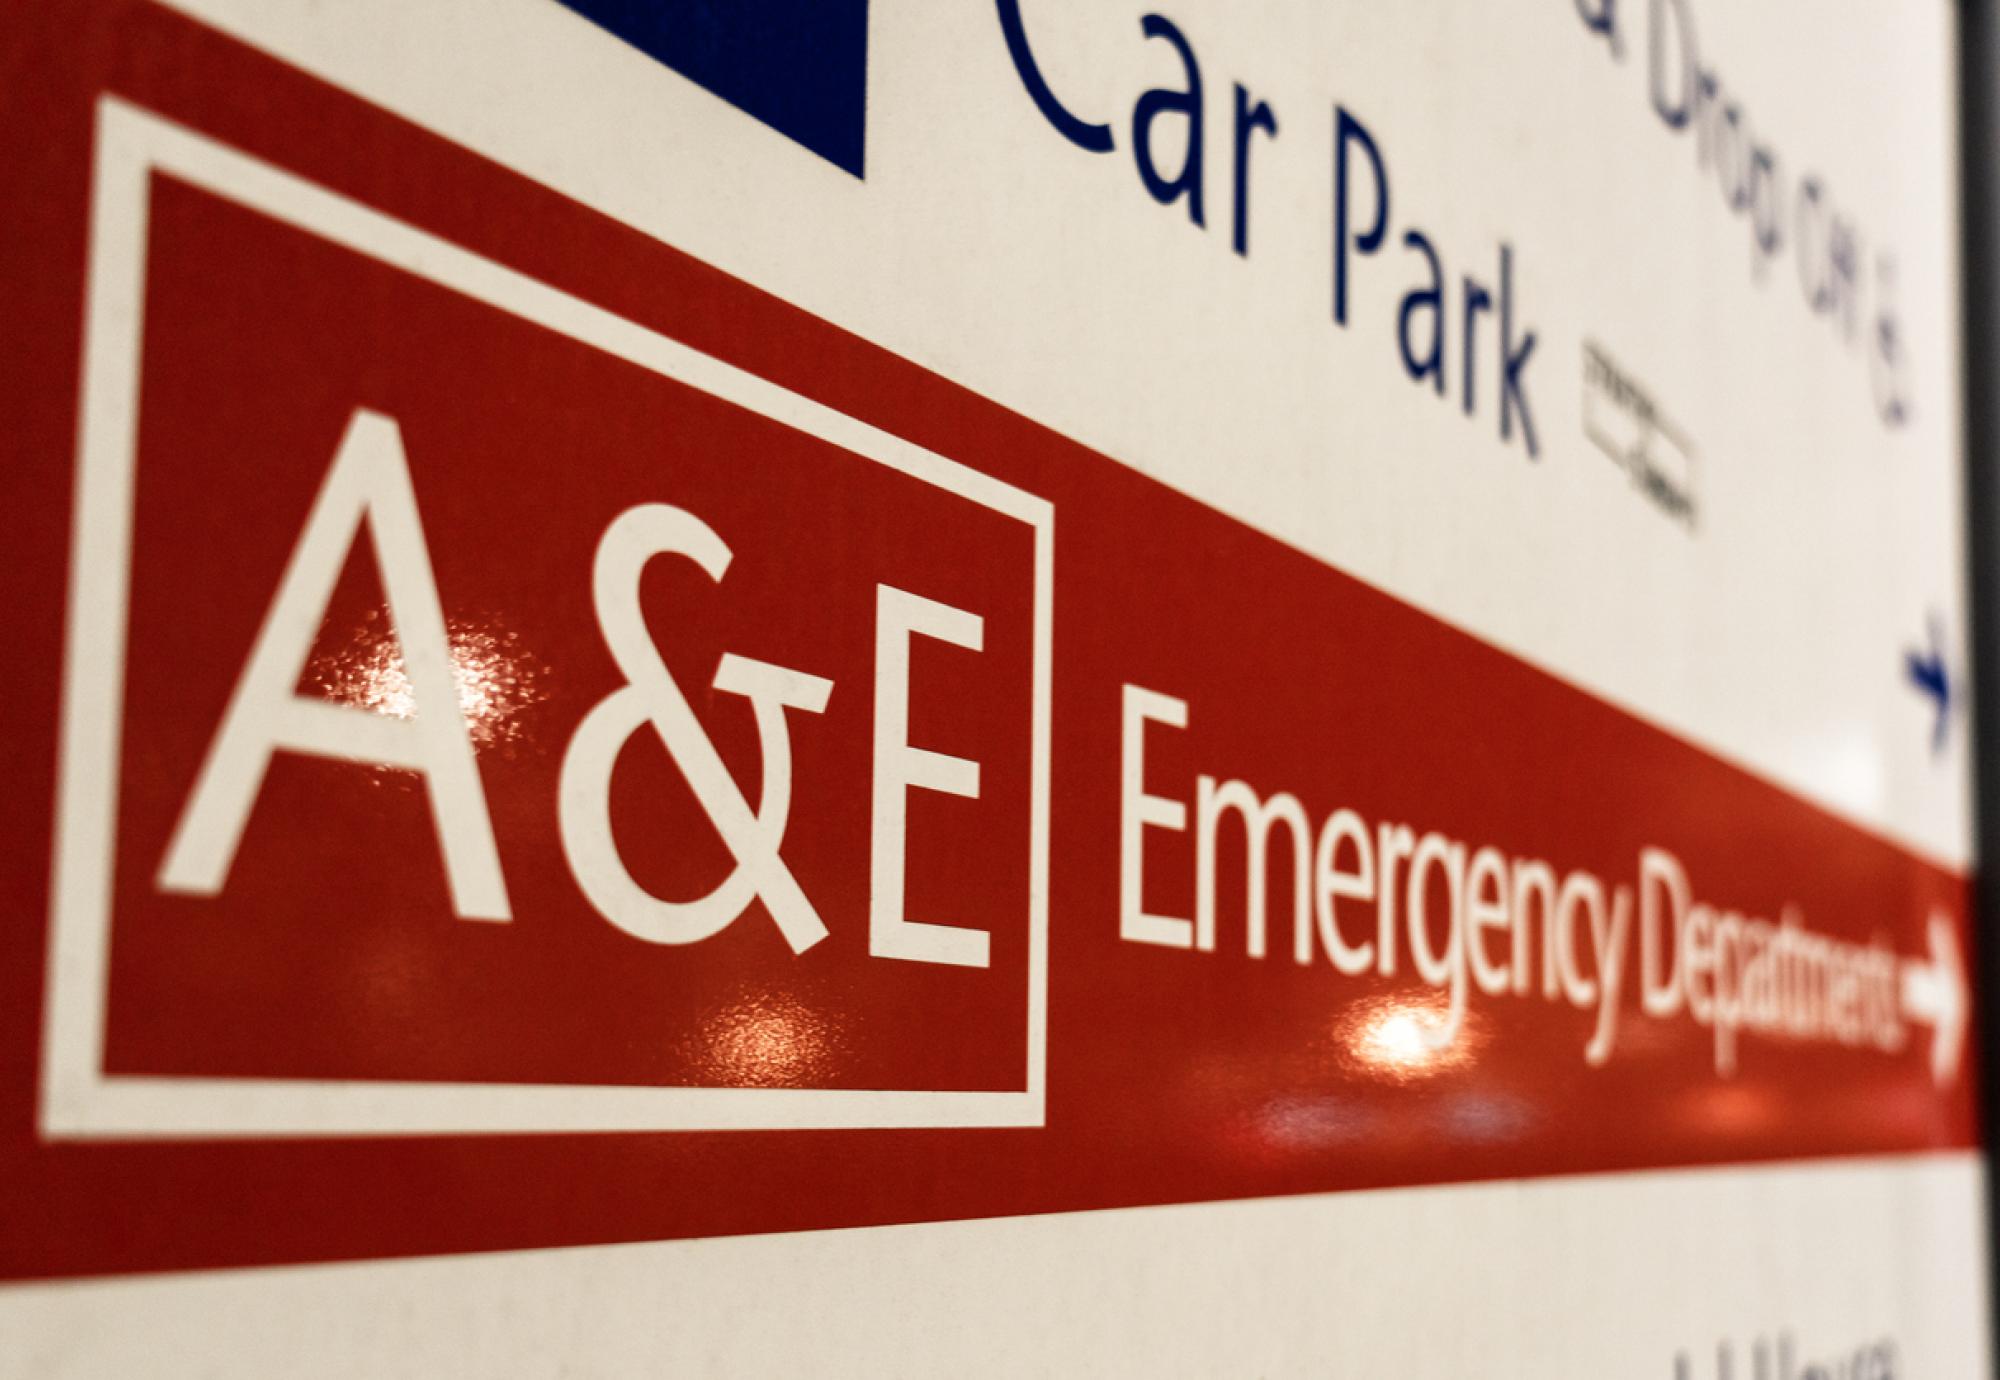 A&E Emergency Department sign